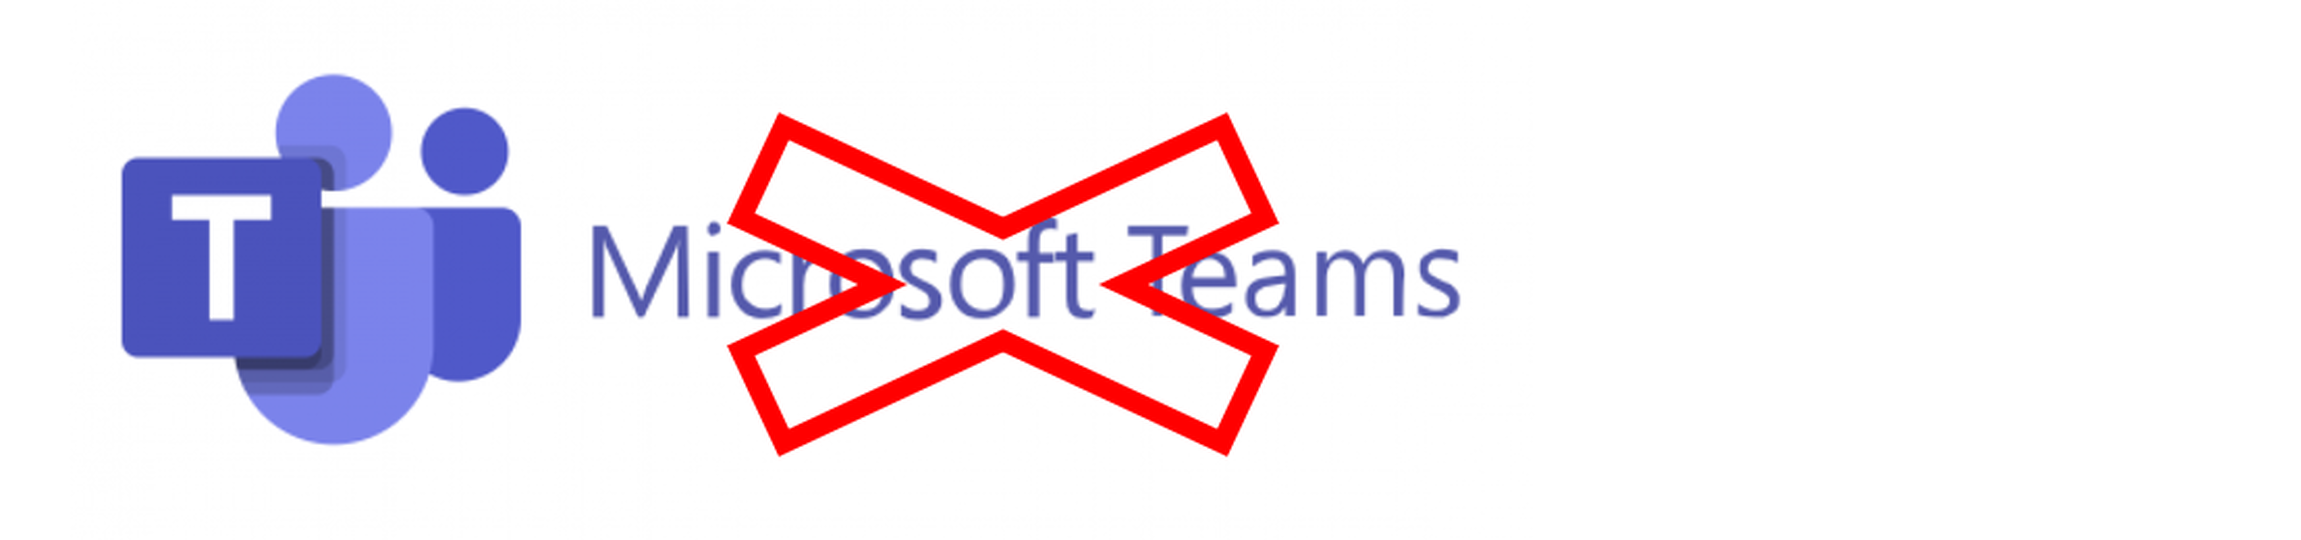 Microsoft expands removal of Teams from Microsoft 365 and Office 365 to all customers